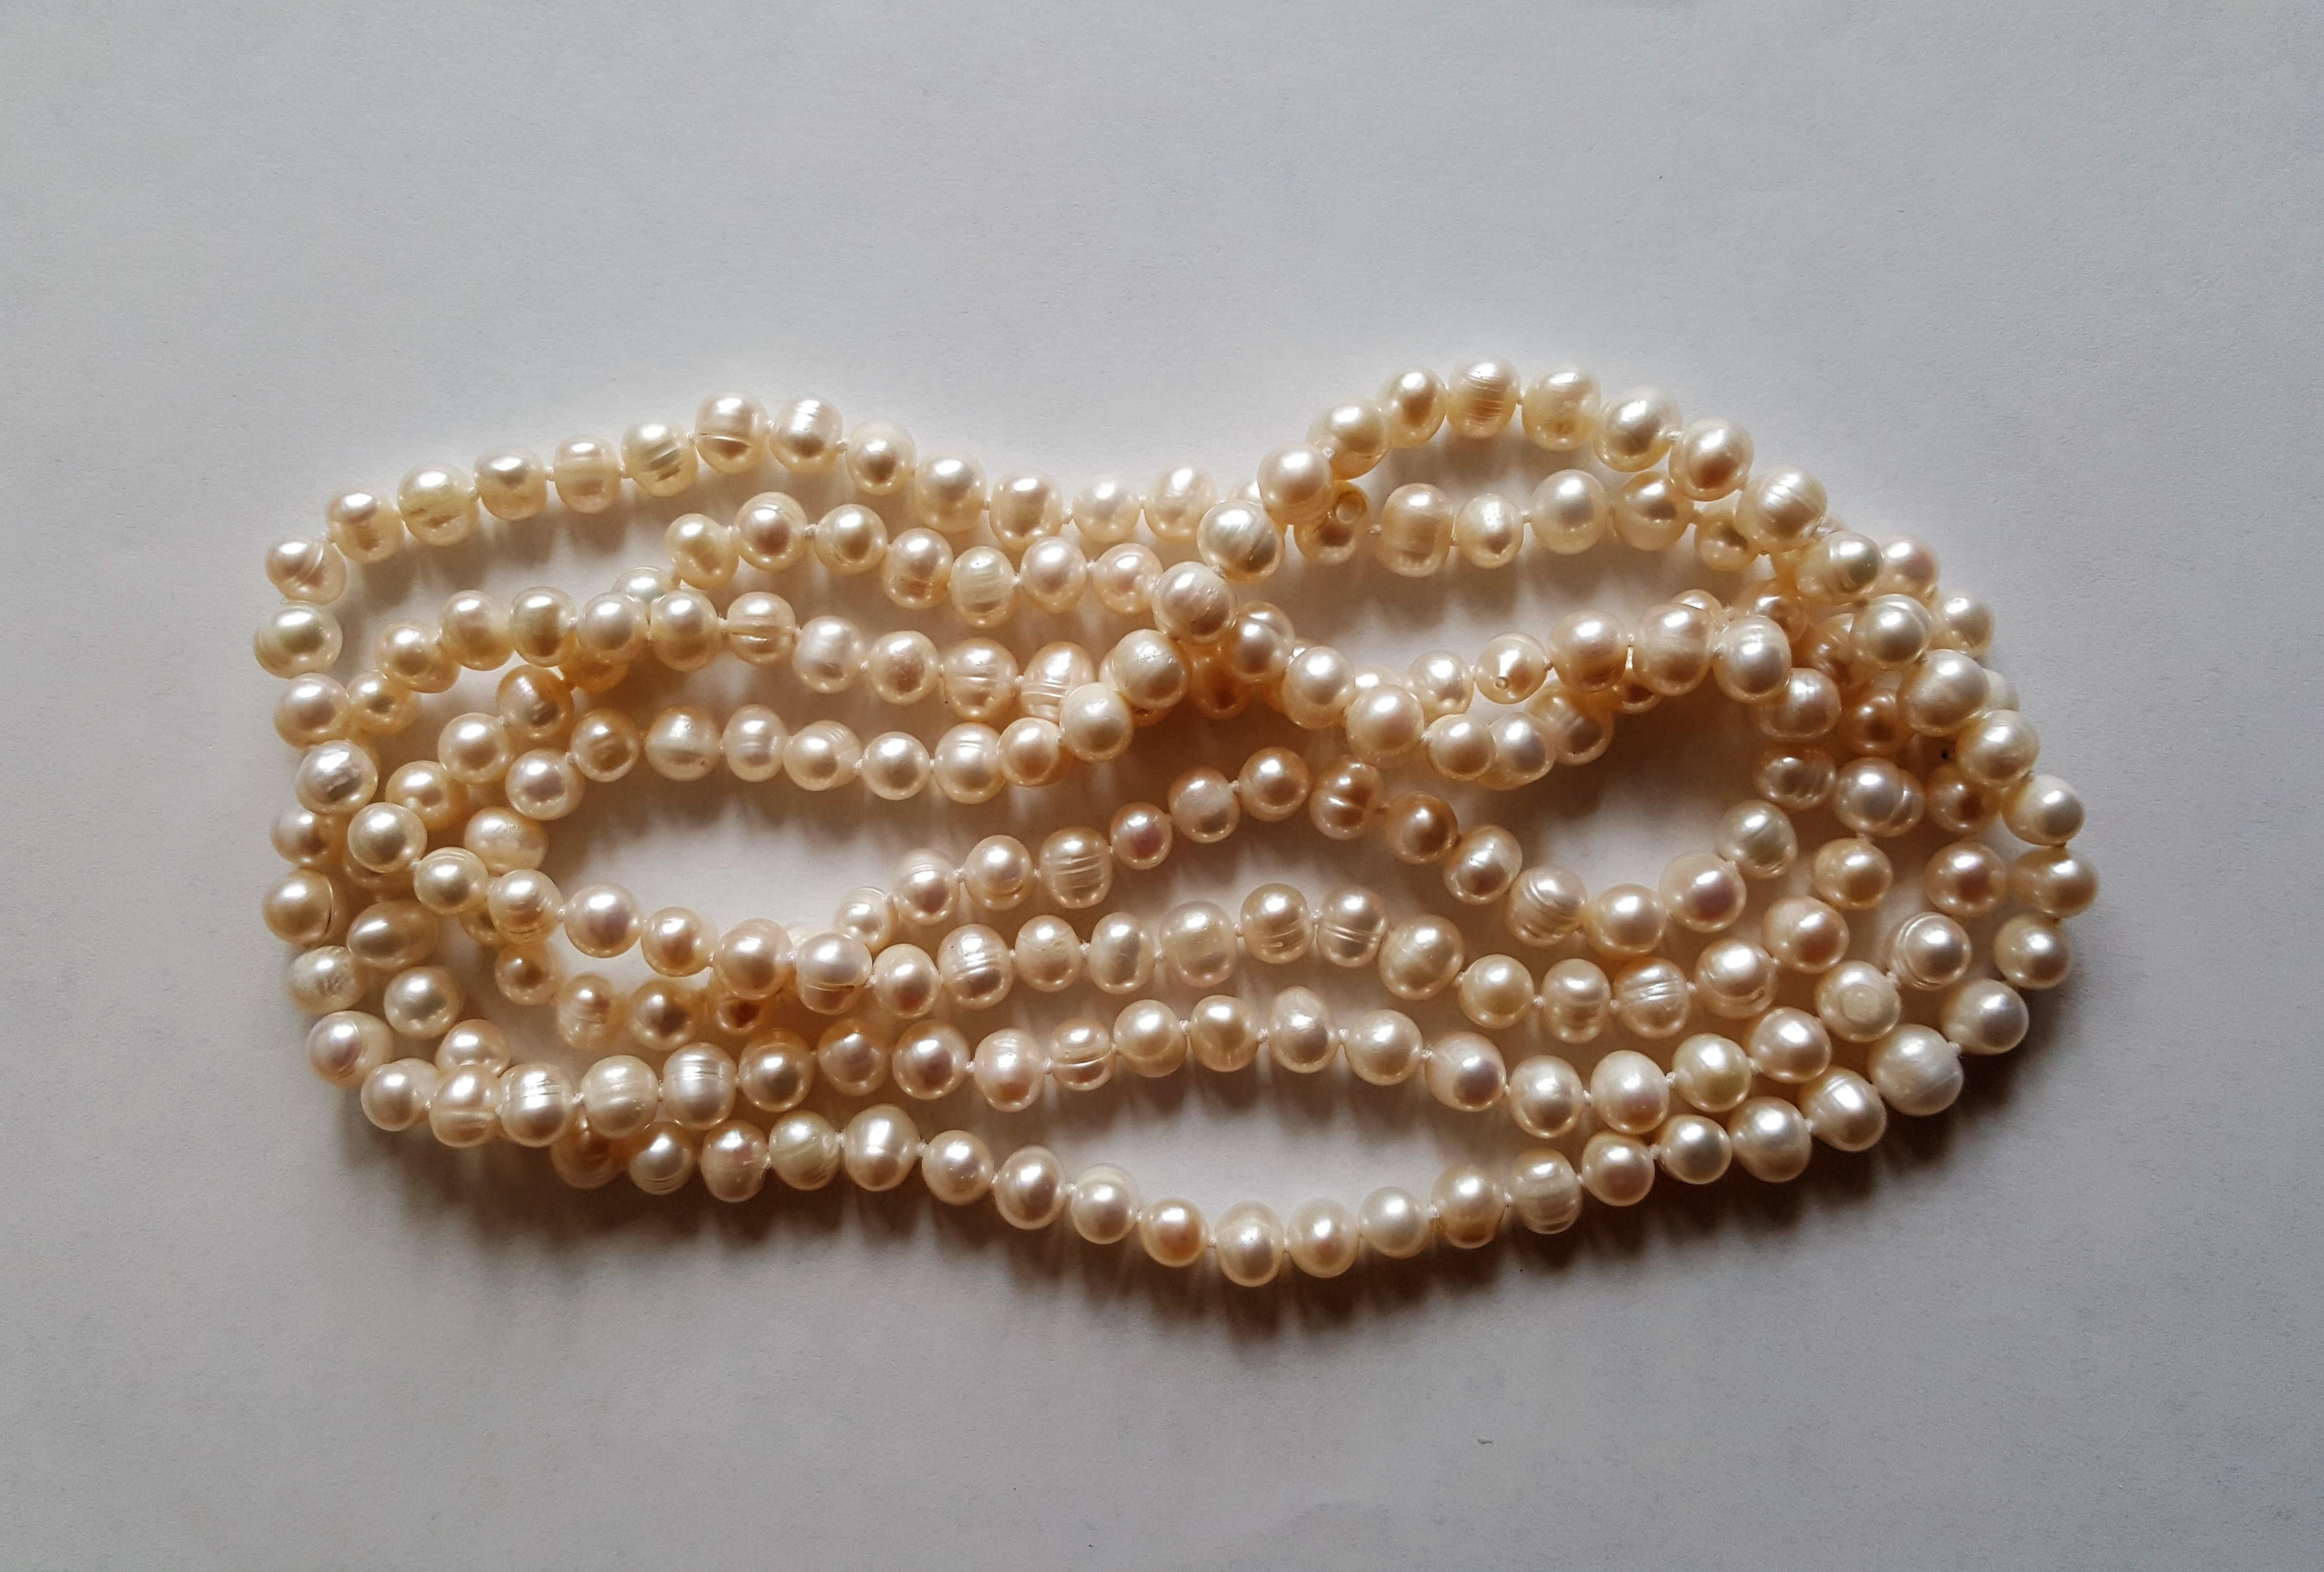 A beautiful strand of white freshwater pearls that is 56 inches in length. Pearls are in very good condition and range in size from 6mm to 8mm and have a lustrous nacre. These pearls make a beautiful double strand and are classic and timeless